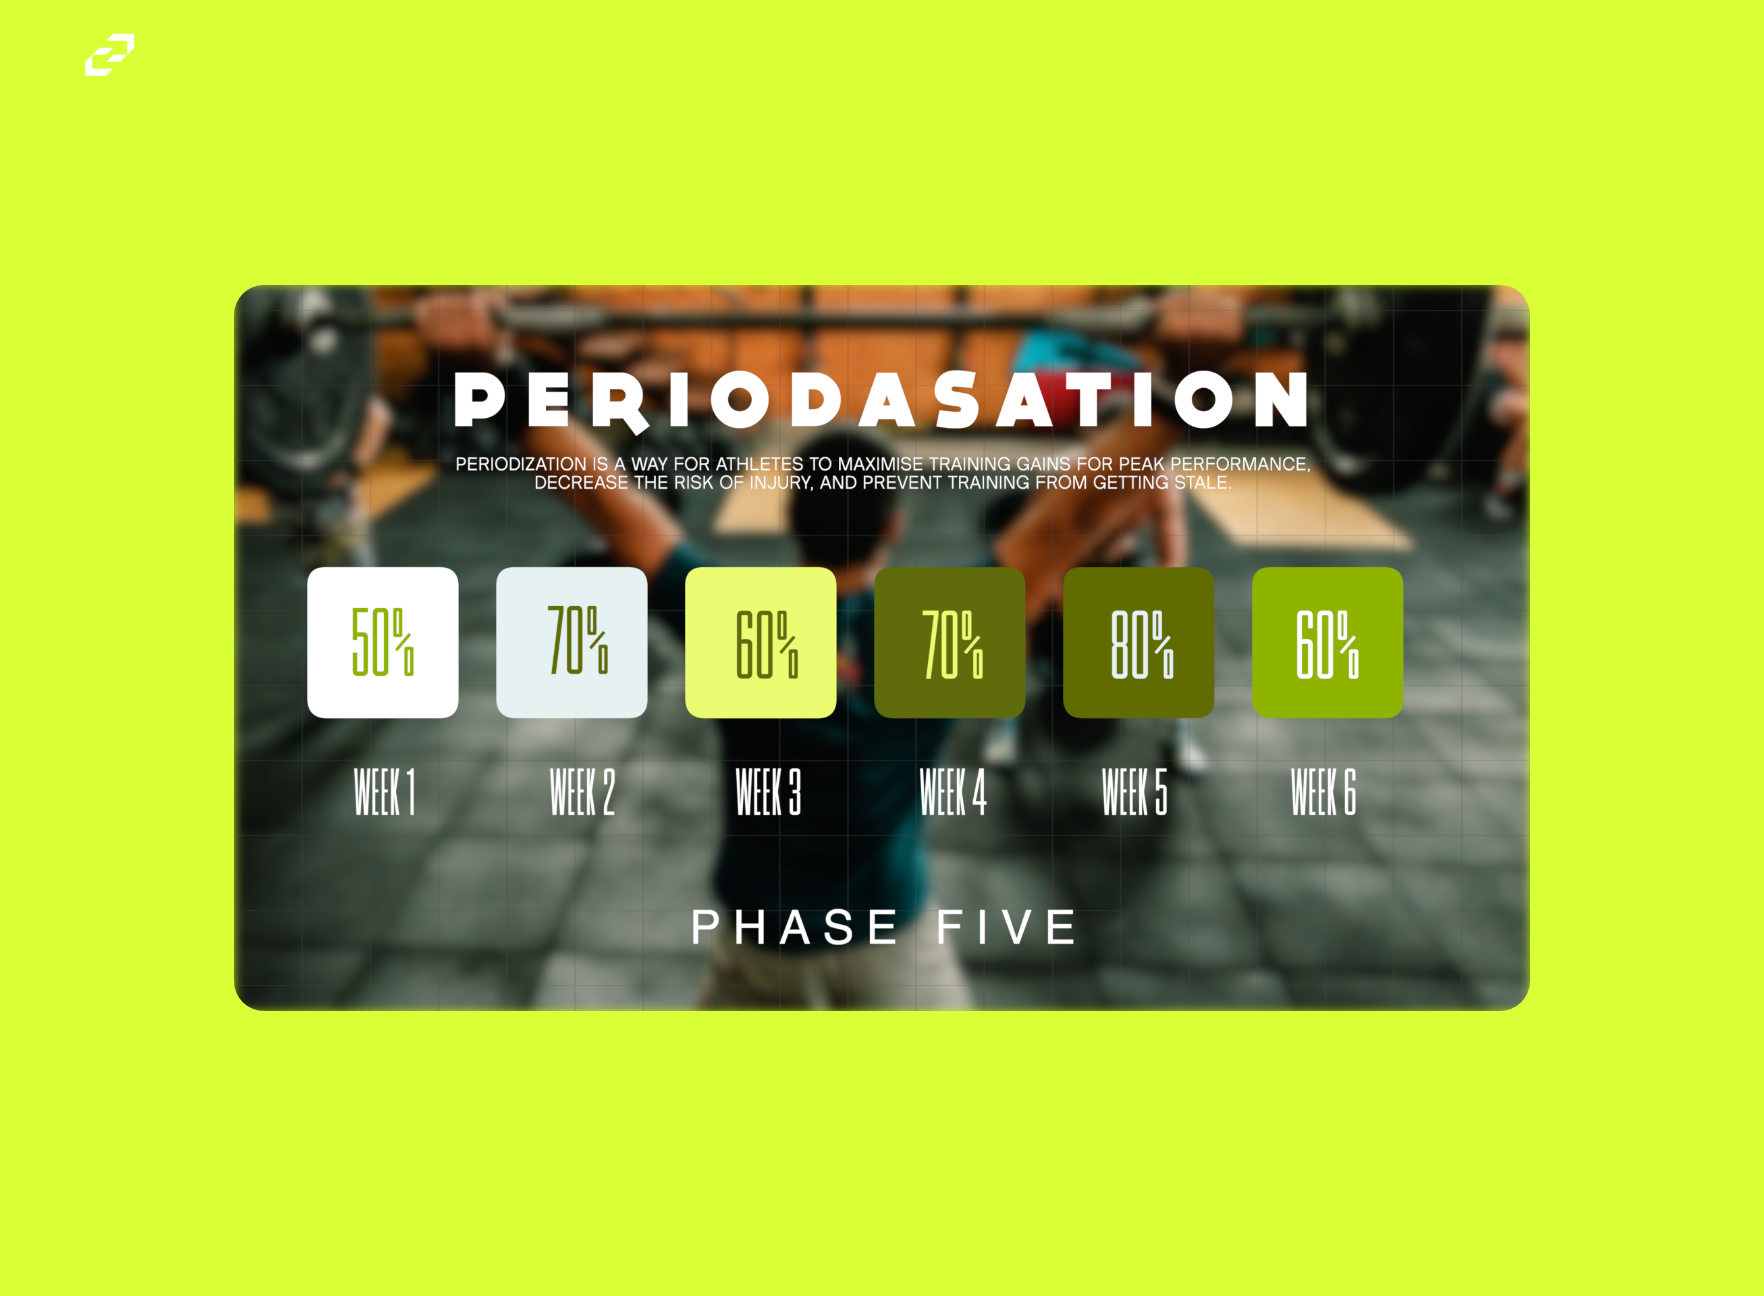 Final Cut Pro Animated Periodisation Training Template, Edutable Video Templates - CCreation Store 